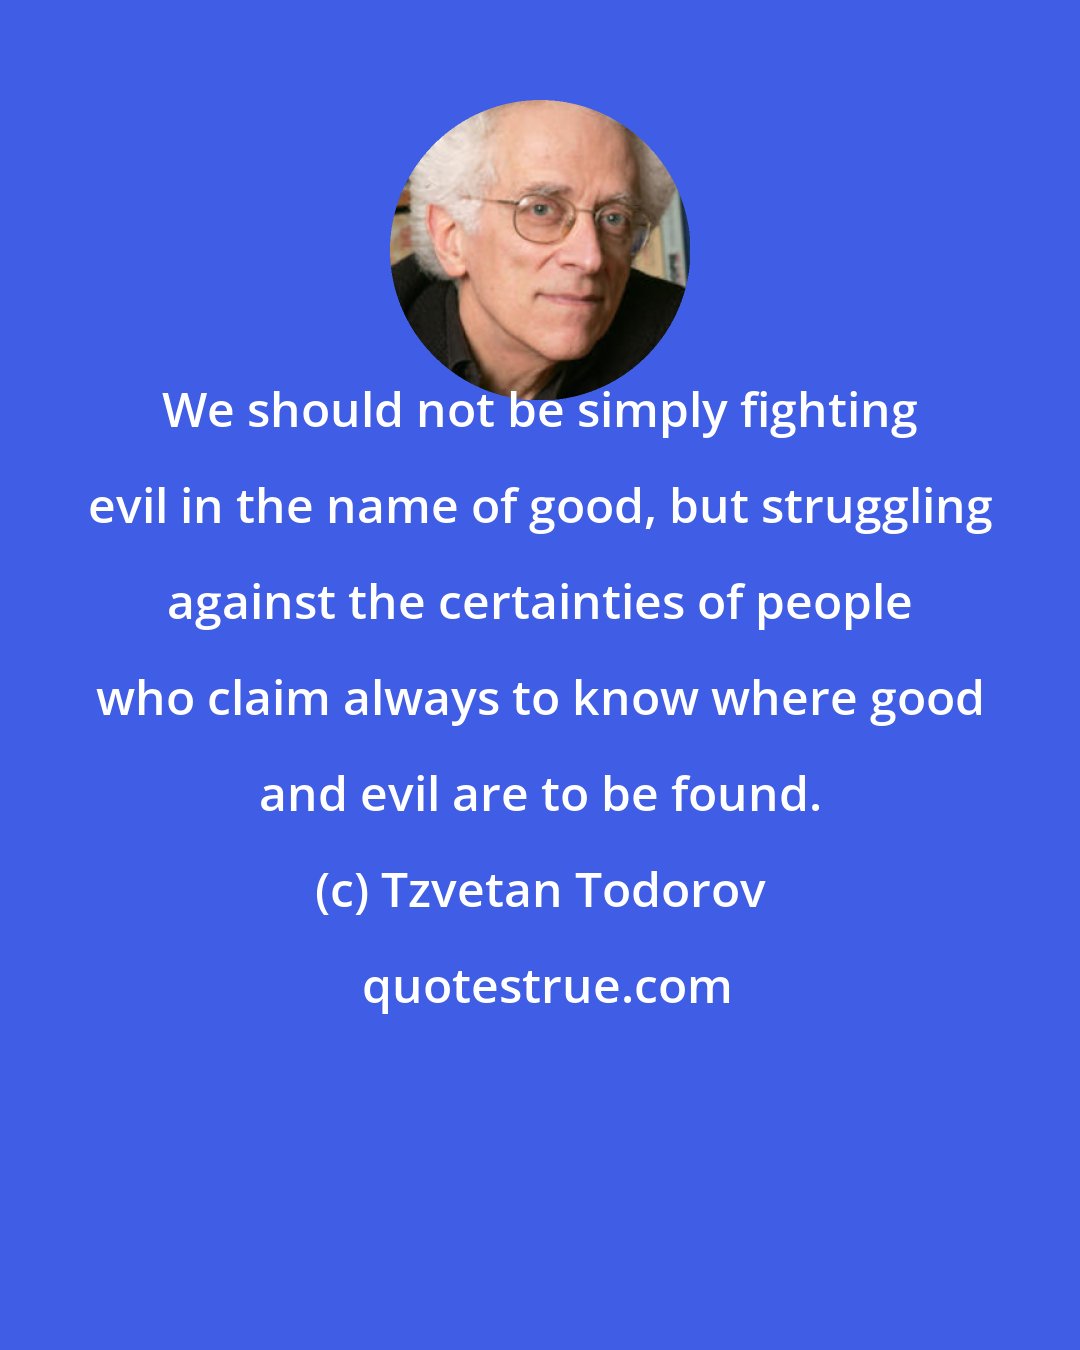 Tzvetan Todorov: We should not be simply fighting evil in the name of good, but struggling against the certainties of people who claim always to know where good and evil are to be found.